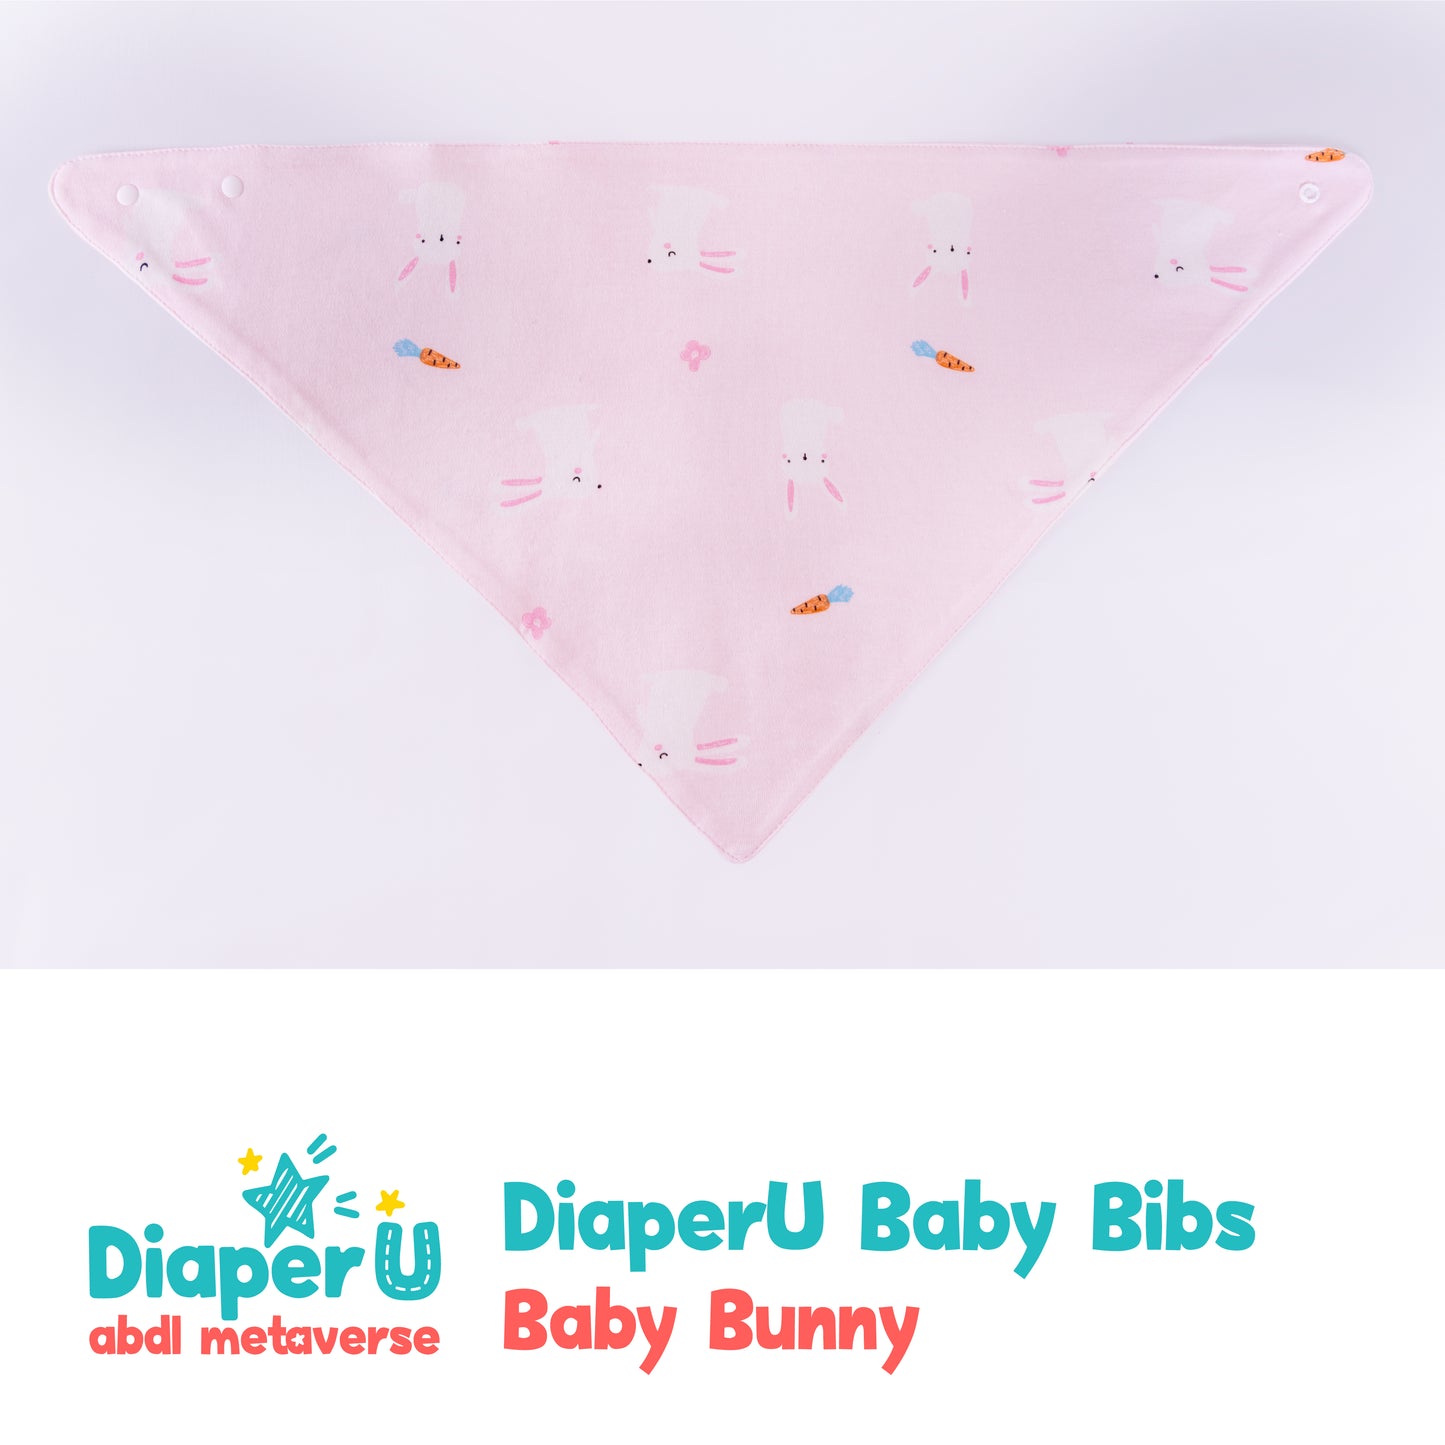 ABDL Baby Bibs - Baby Bunny (Adult Size)